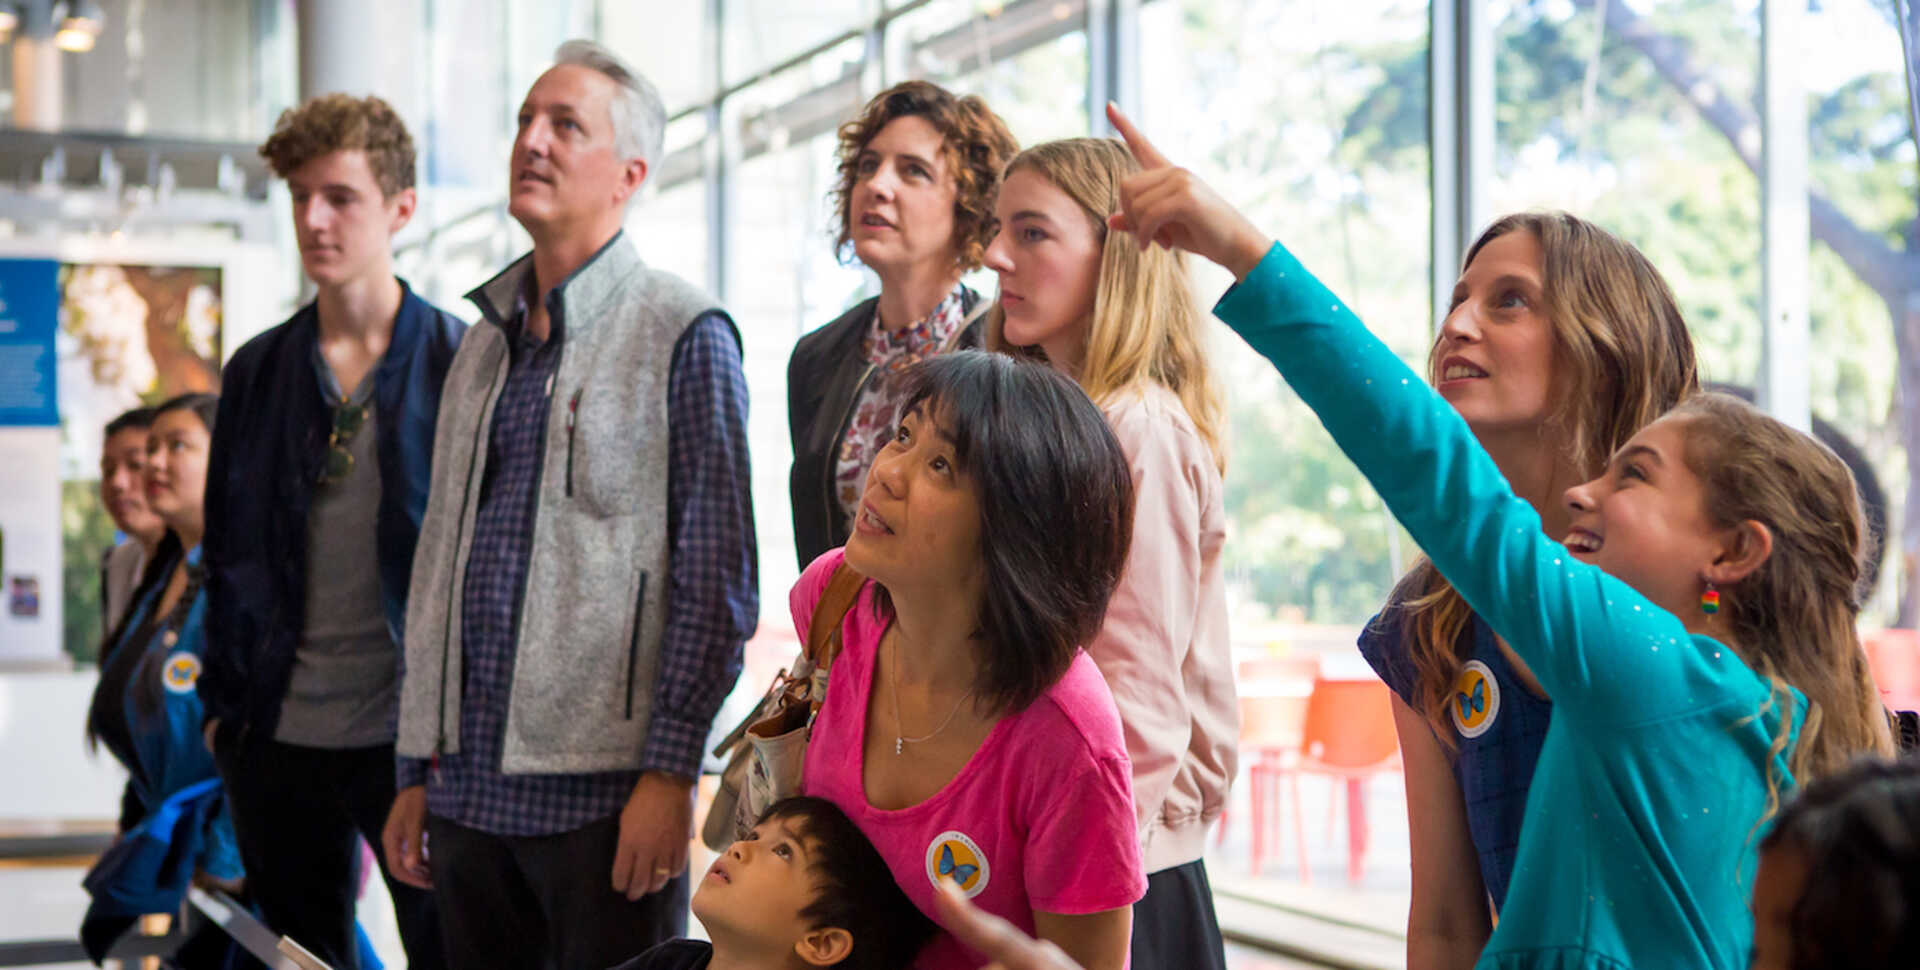 Members watching Gouldian finches in the Color of Life exhibit at the California Academy of Sciences